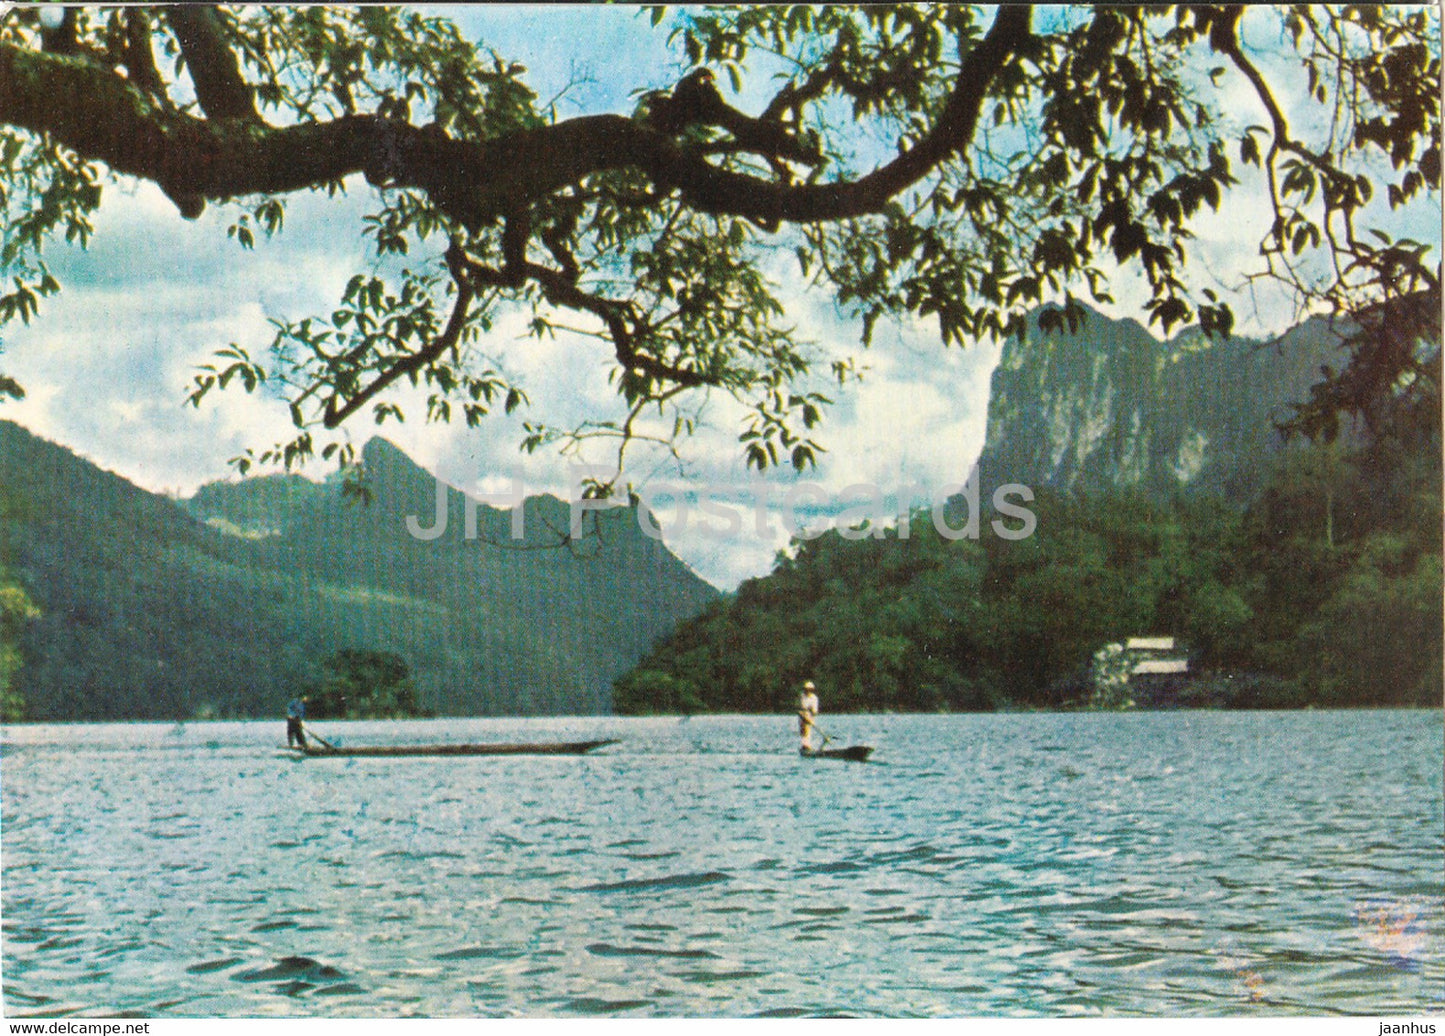 Some Aspects of Vietnam - The Ba Be Lake in Bac Can province - Vietnam - unused - JH Postcards